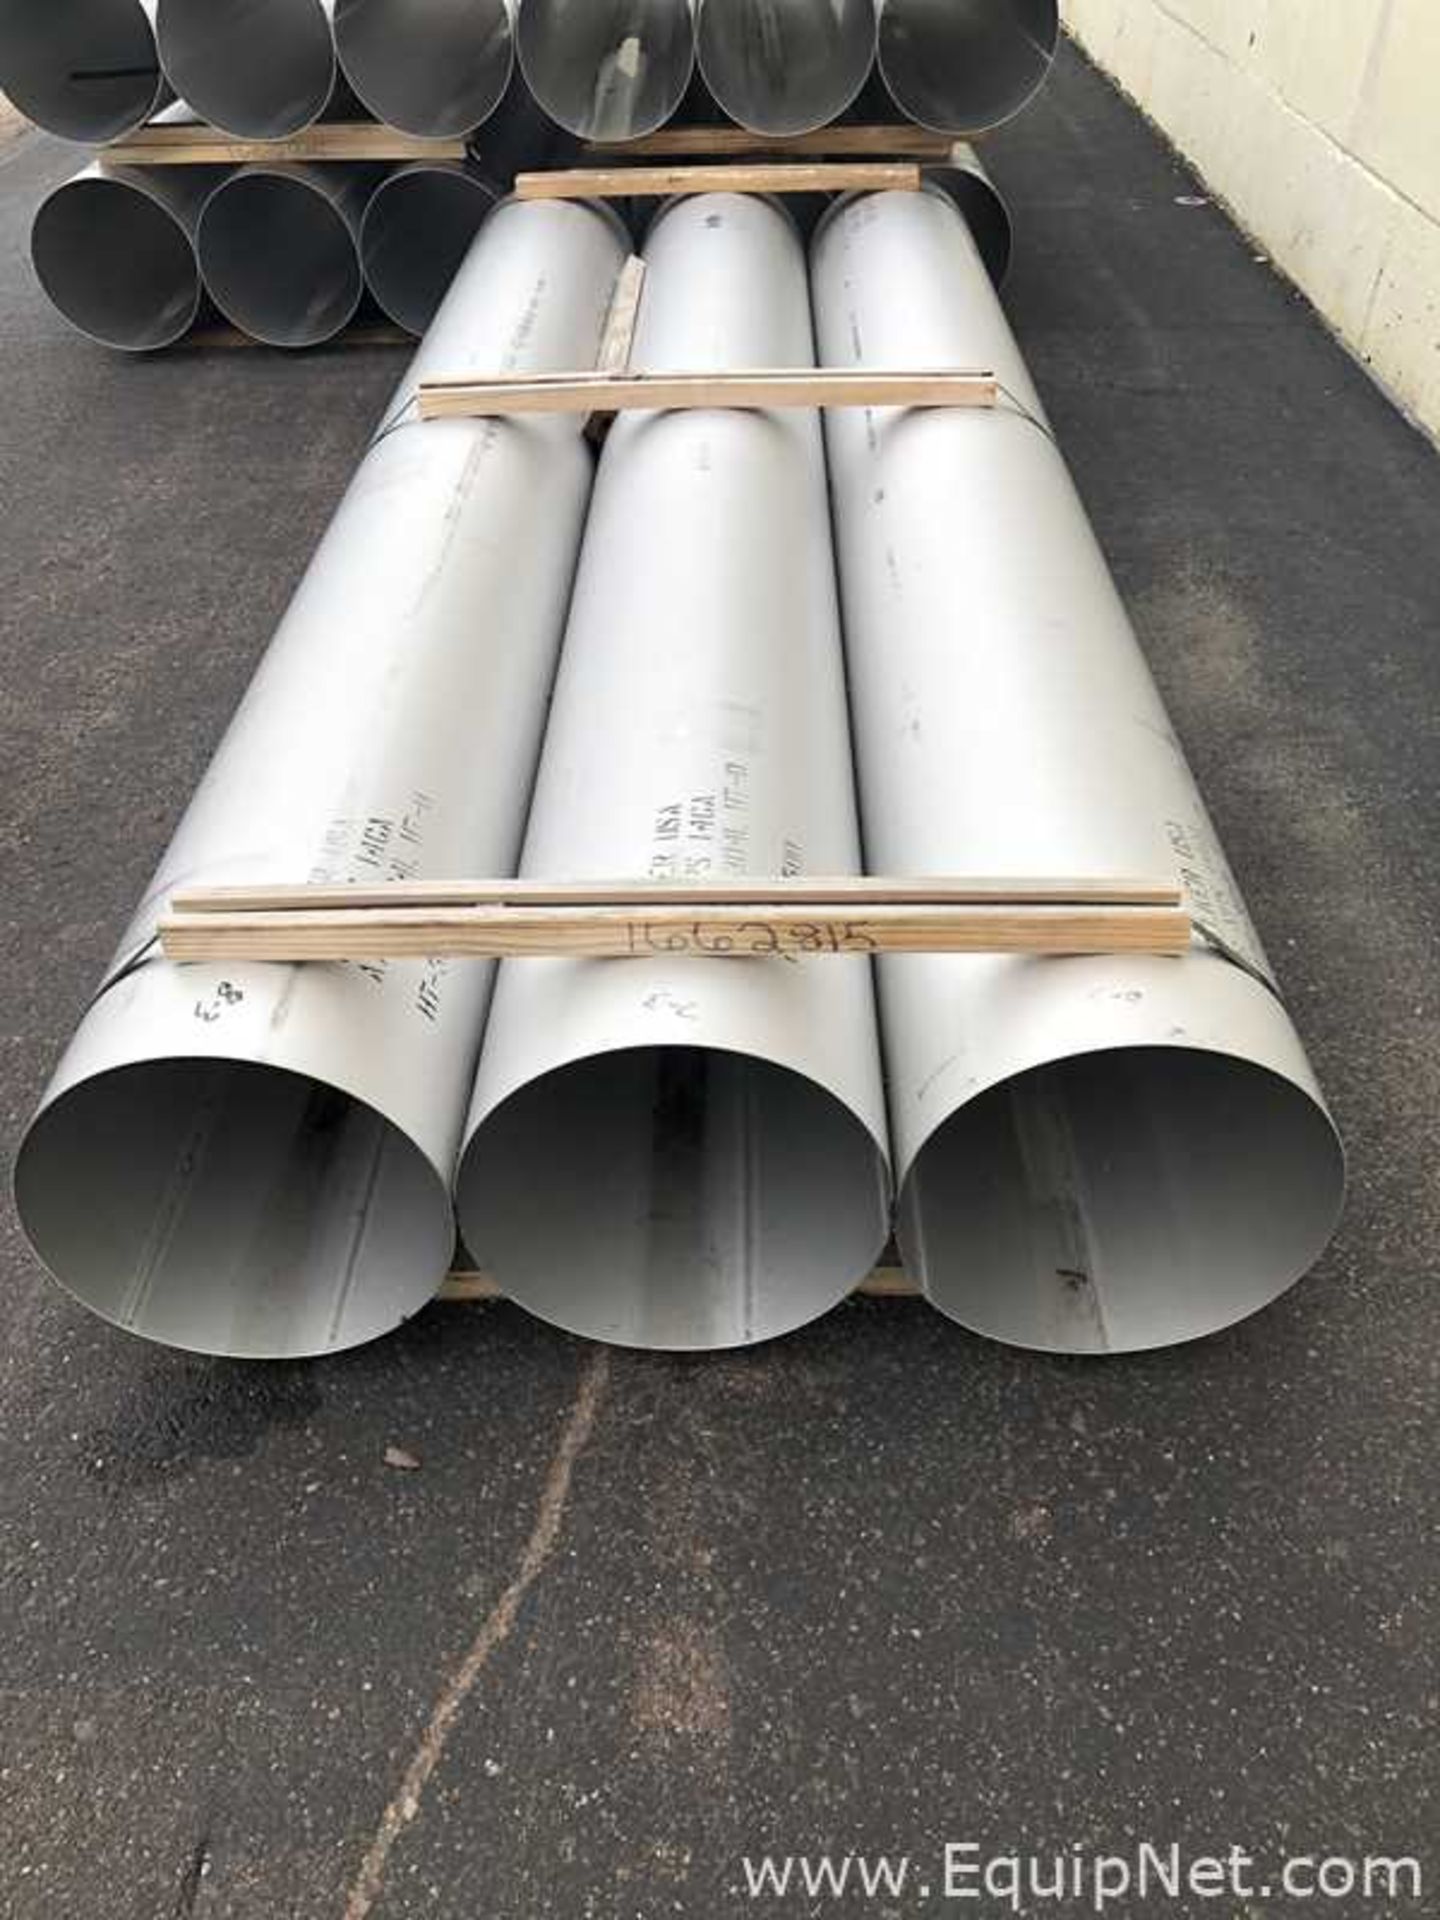 Lot Of Approx 15 Stainless Steel 304L Piping 16in diam X 150in Length Sections And Semi Elbows - Image 4 of 12